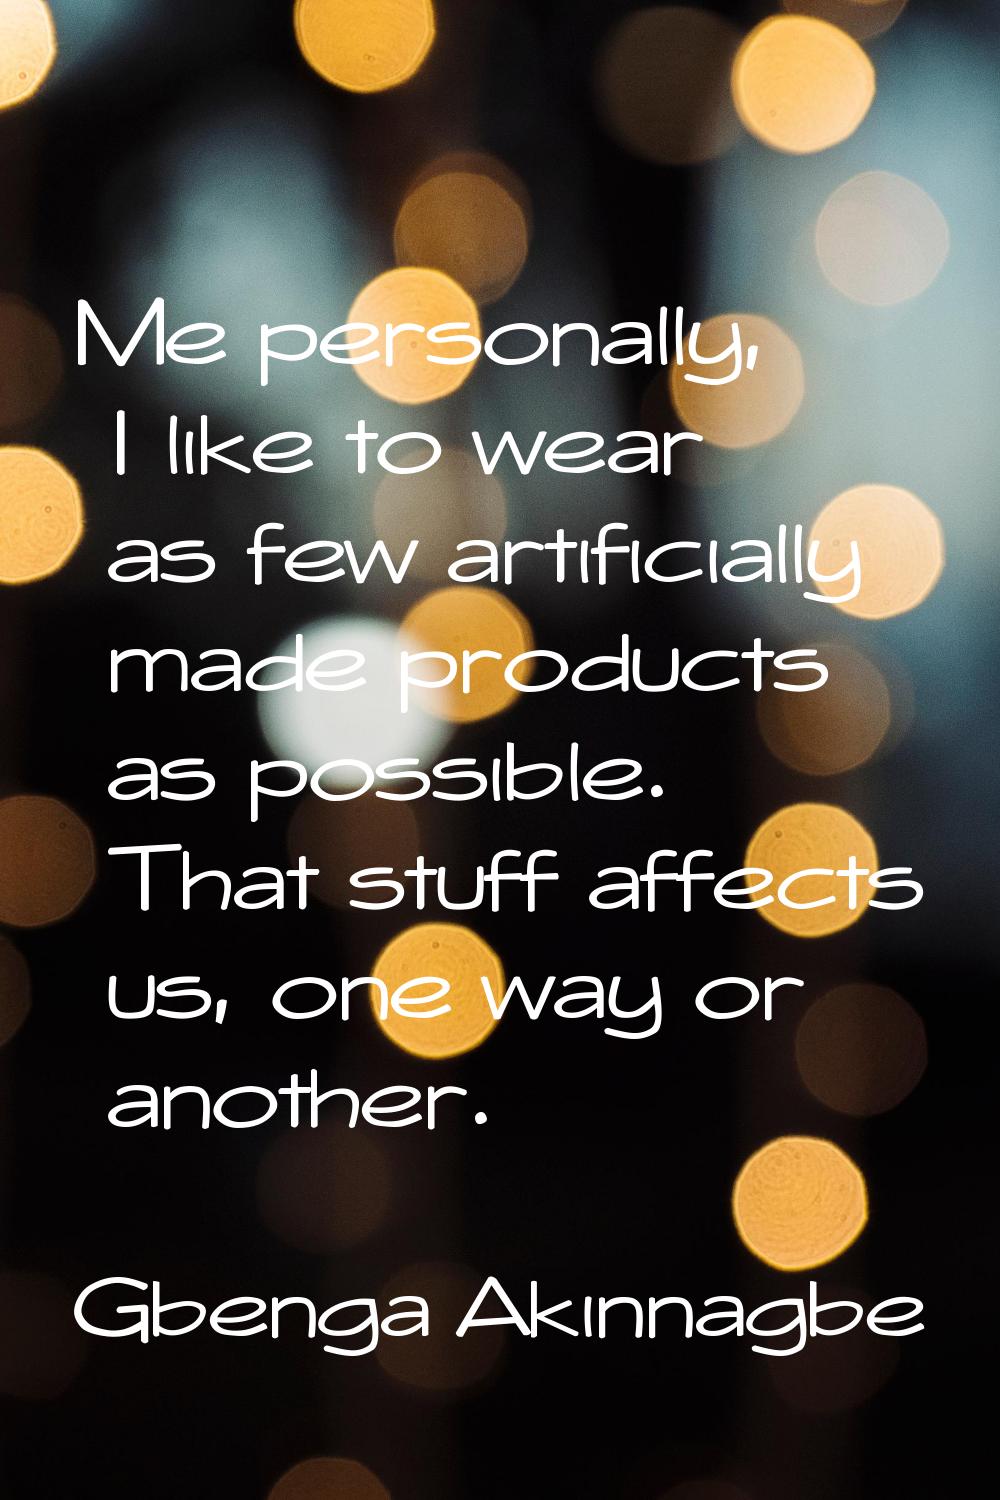 Me personally, I like to wear as few artificially made products as possible. That stuff affects us,